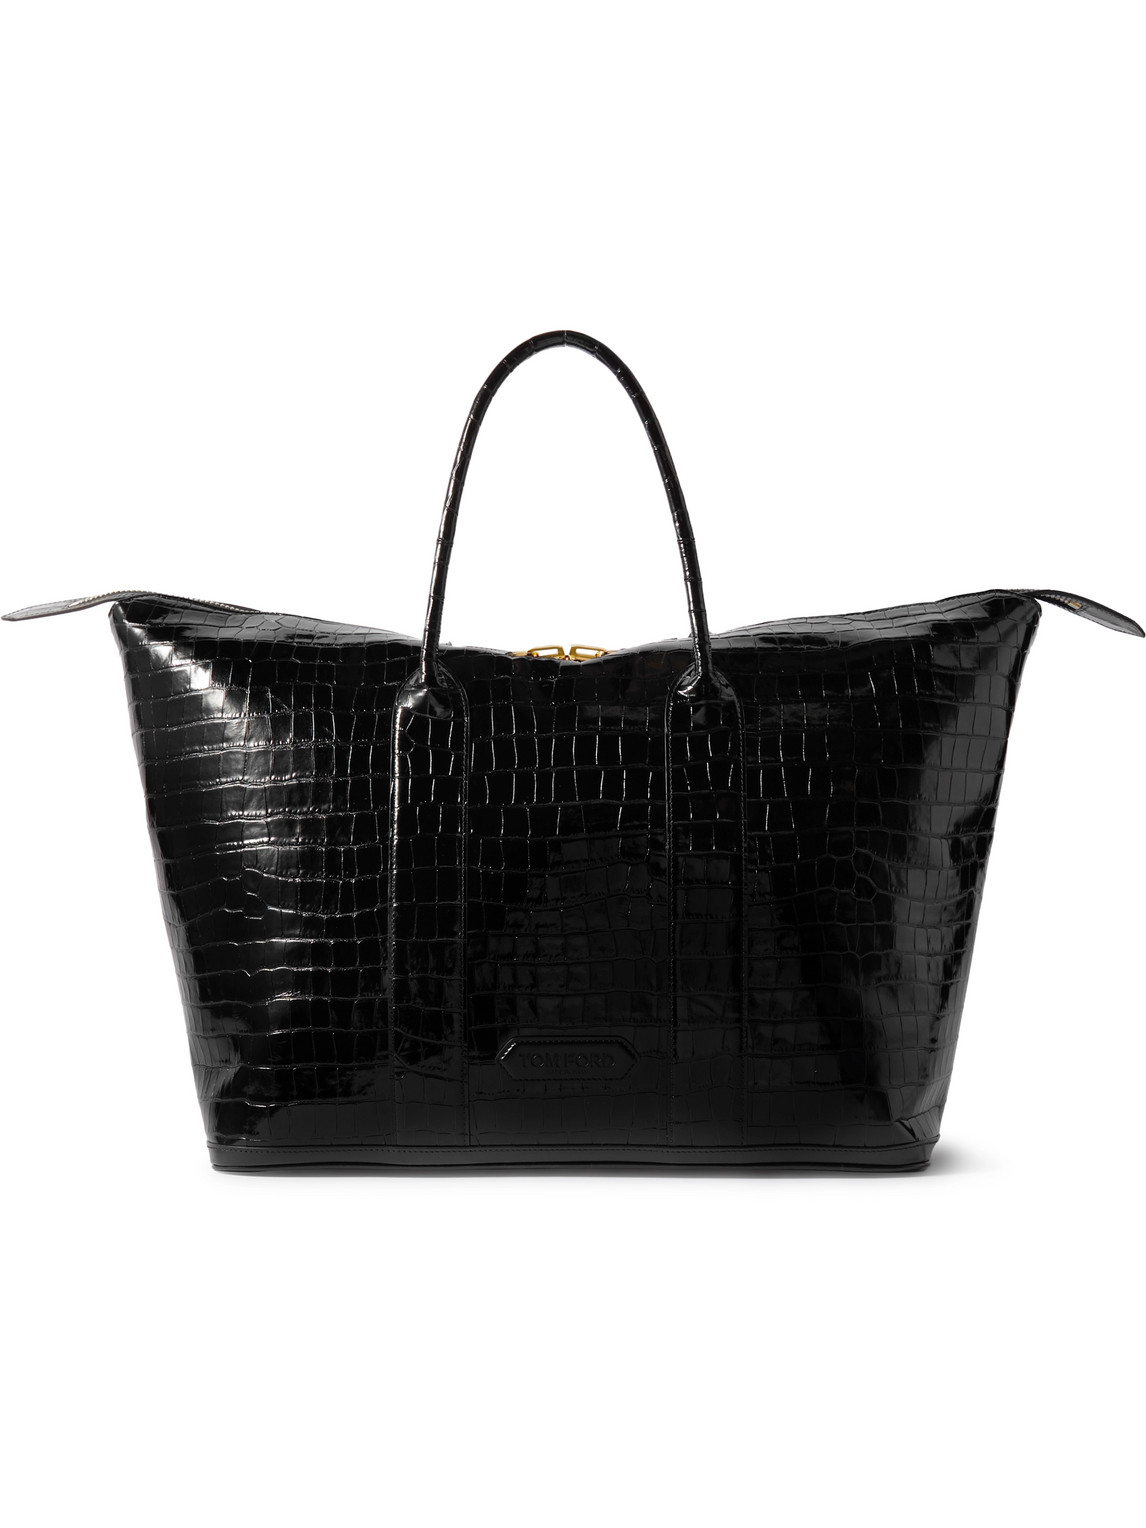 Croc-Effect Patent-Leather Tote Bag